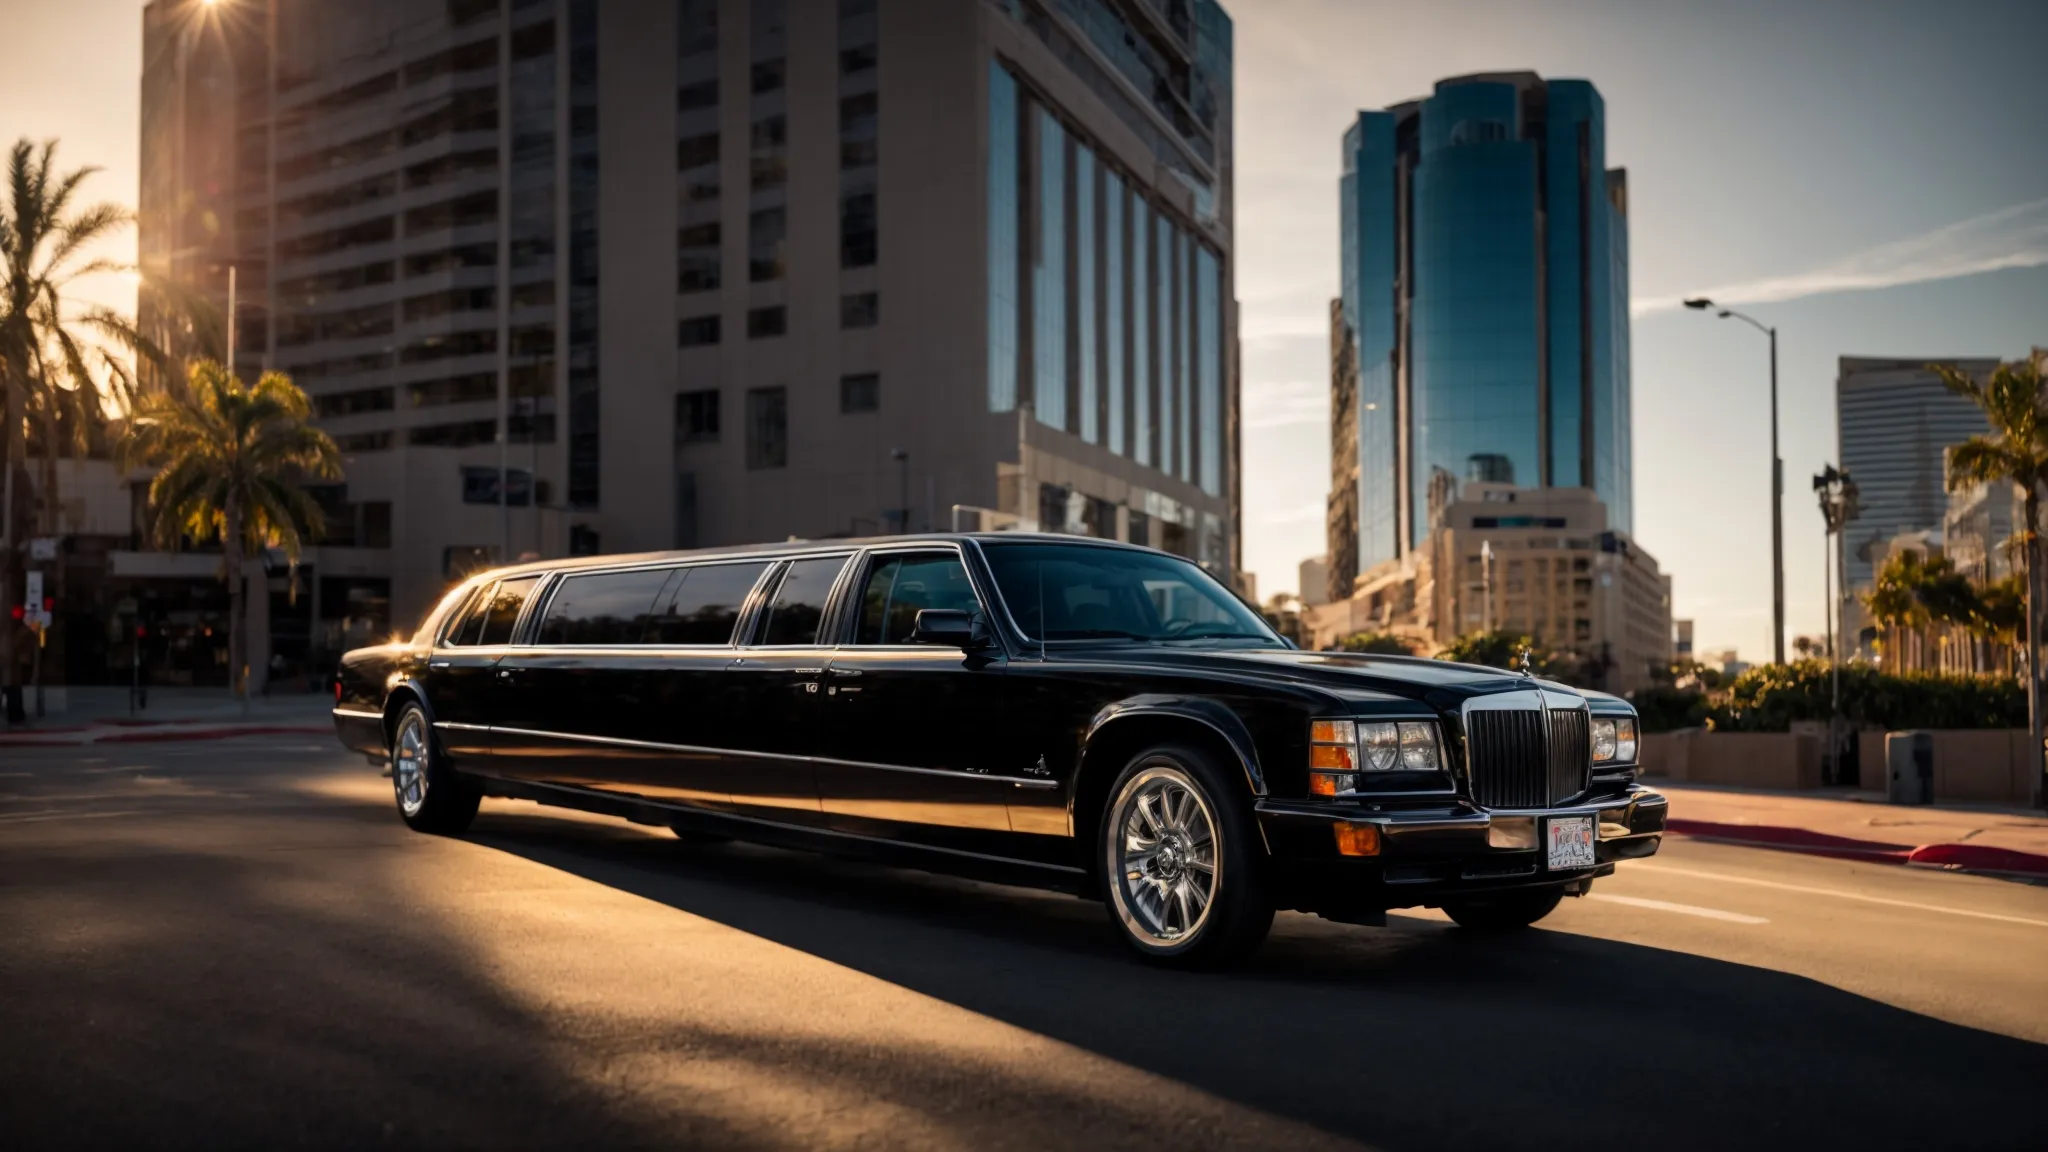 a sleek black limousine glides through the vibrant streets of san diego, with the cityscape gleaming under the warm sunset.